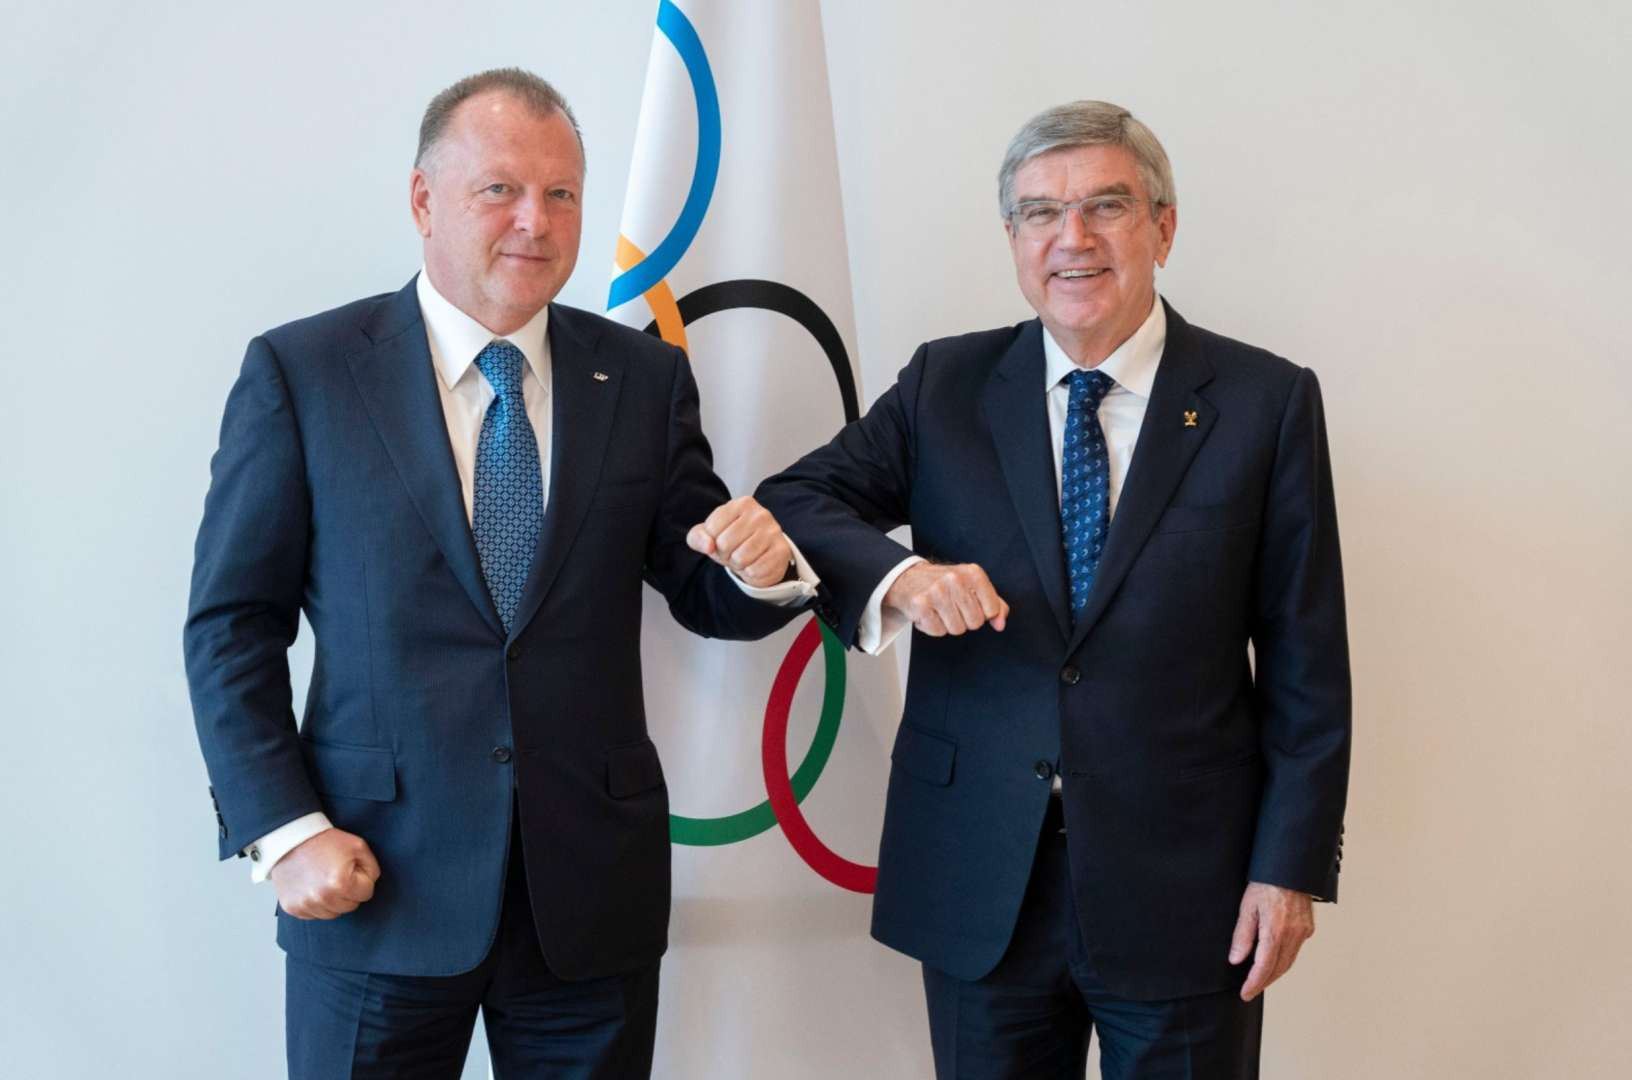 IJF President meets counterpart at IOC to discuss judo’s place in the Olympic Movement